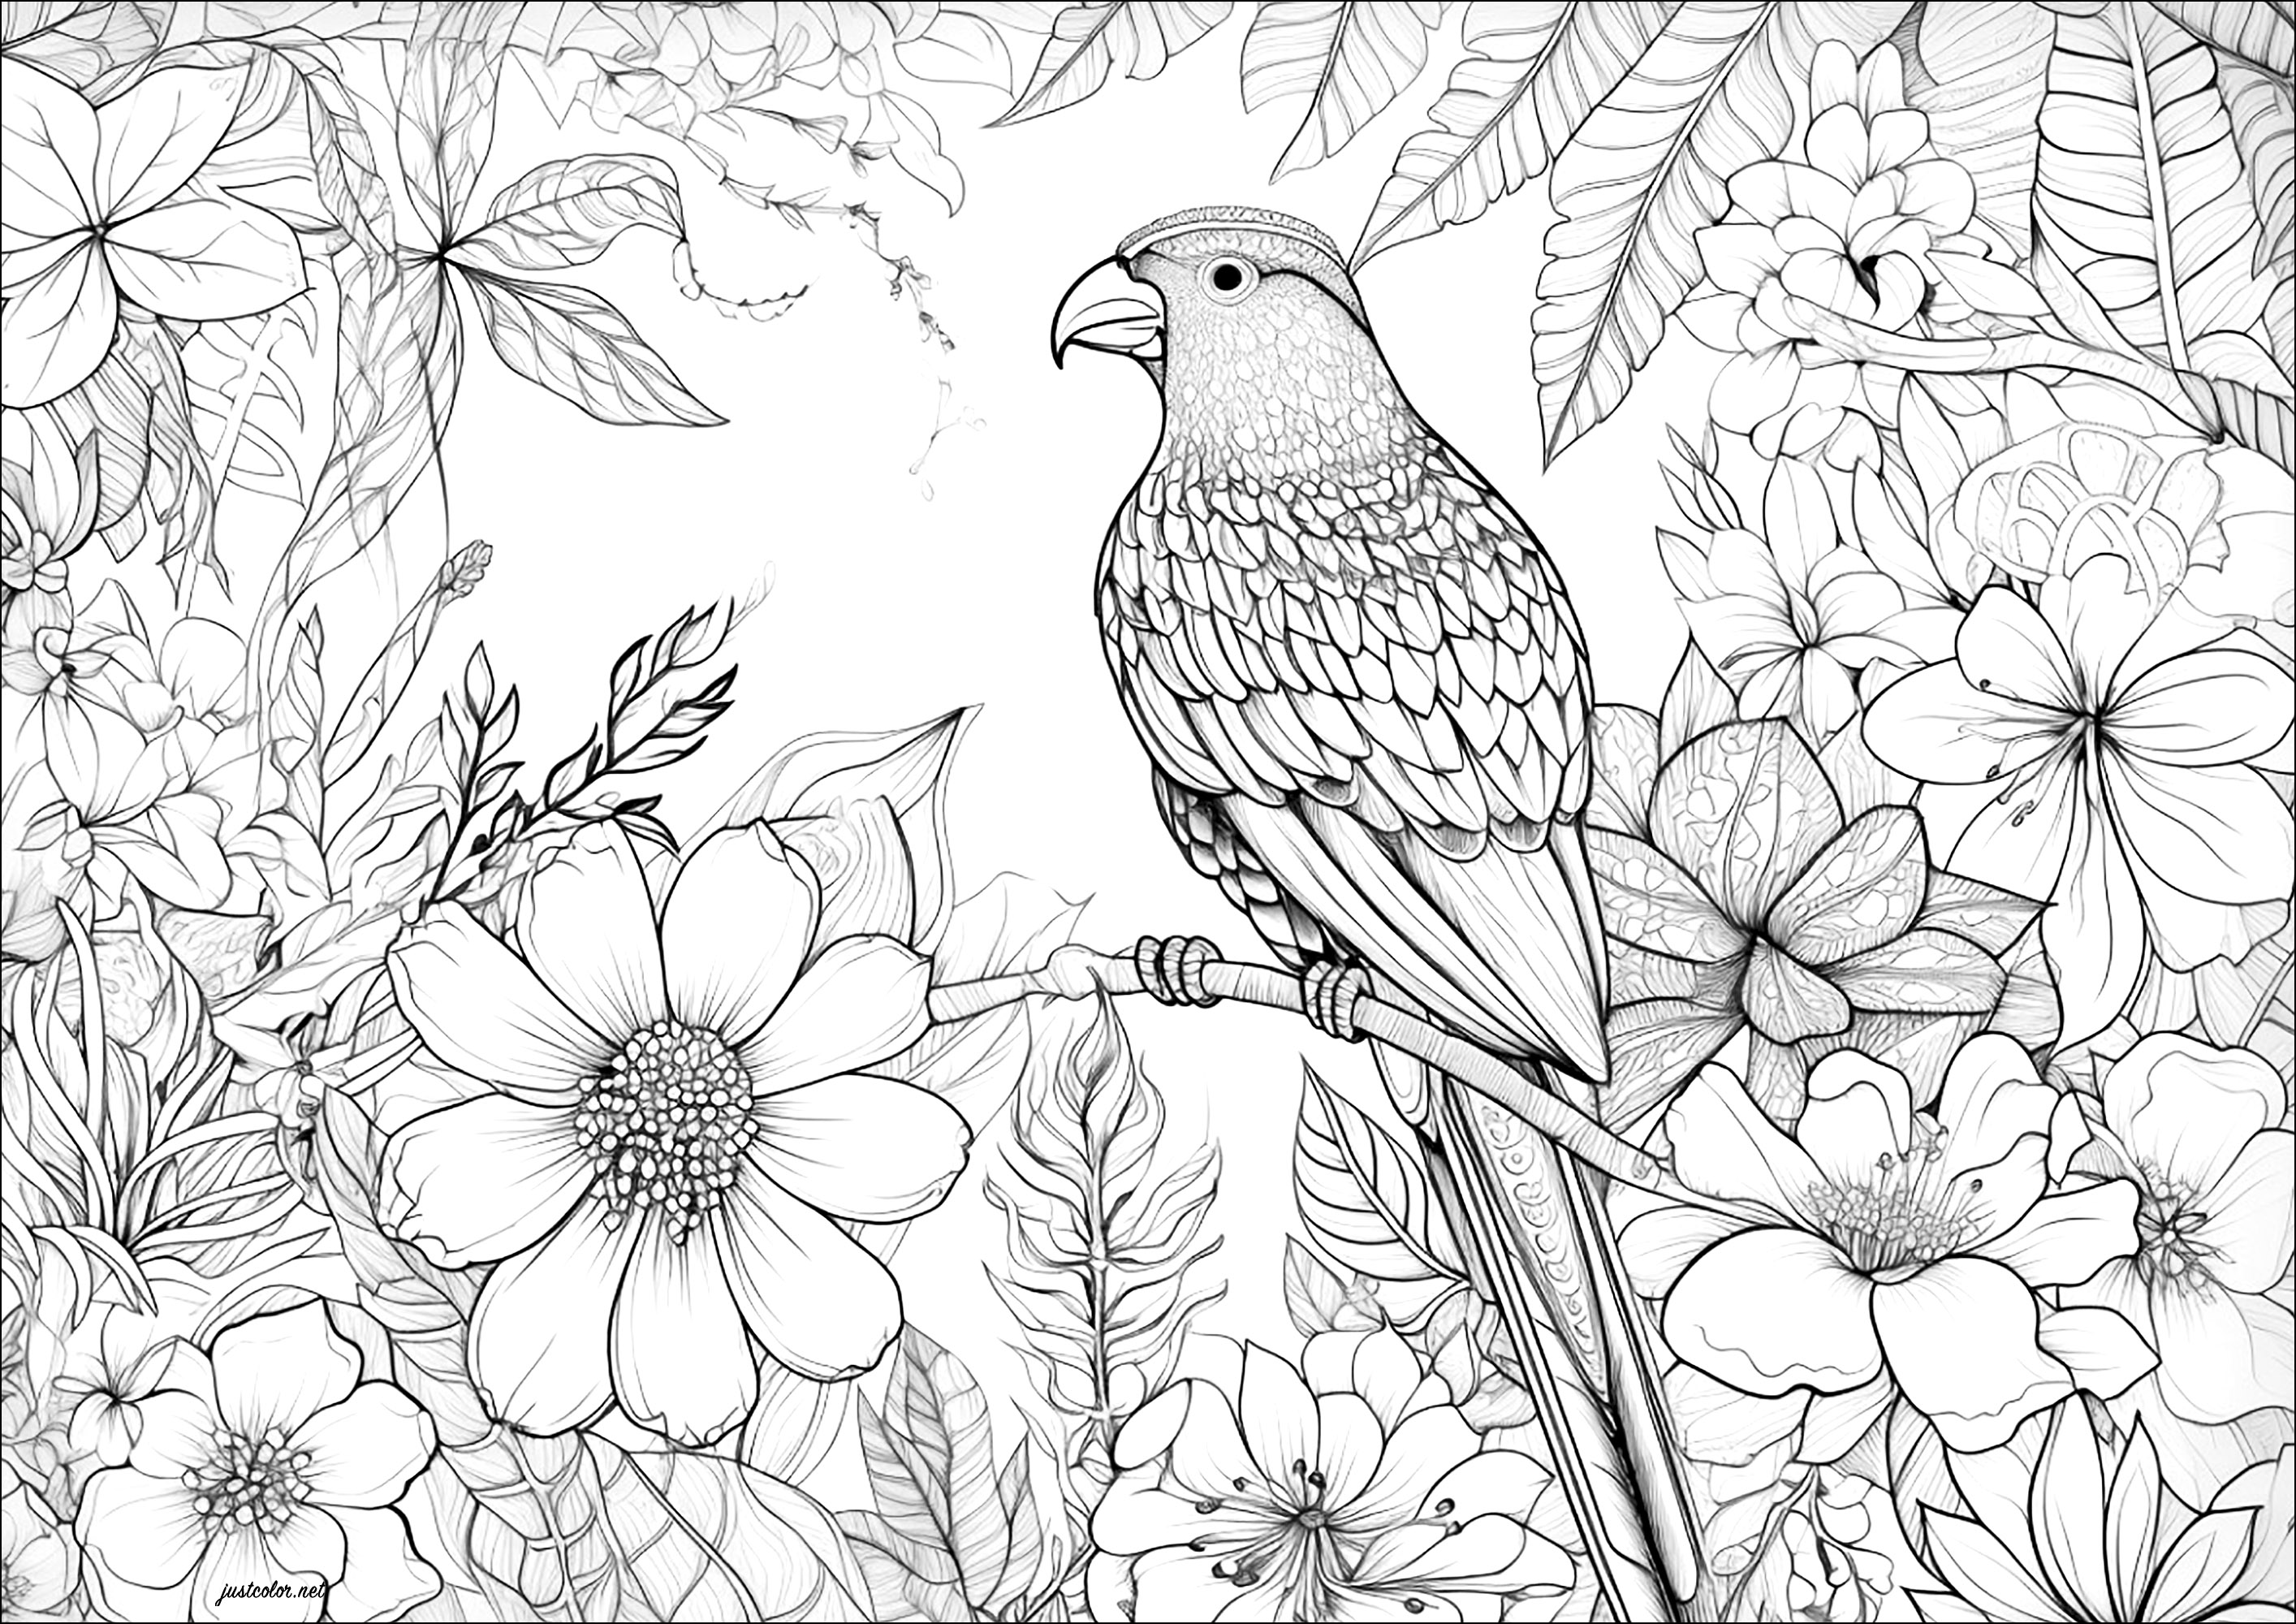 Complex coloring with a beautiful bird. Lots of flowers to color in the background